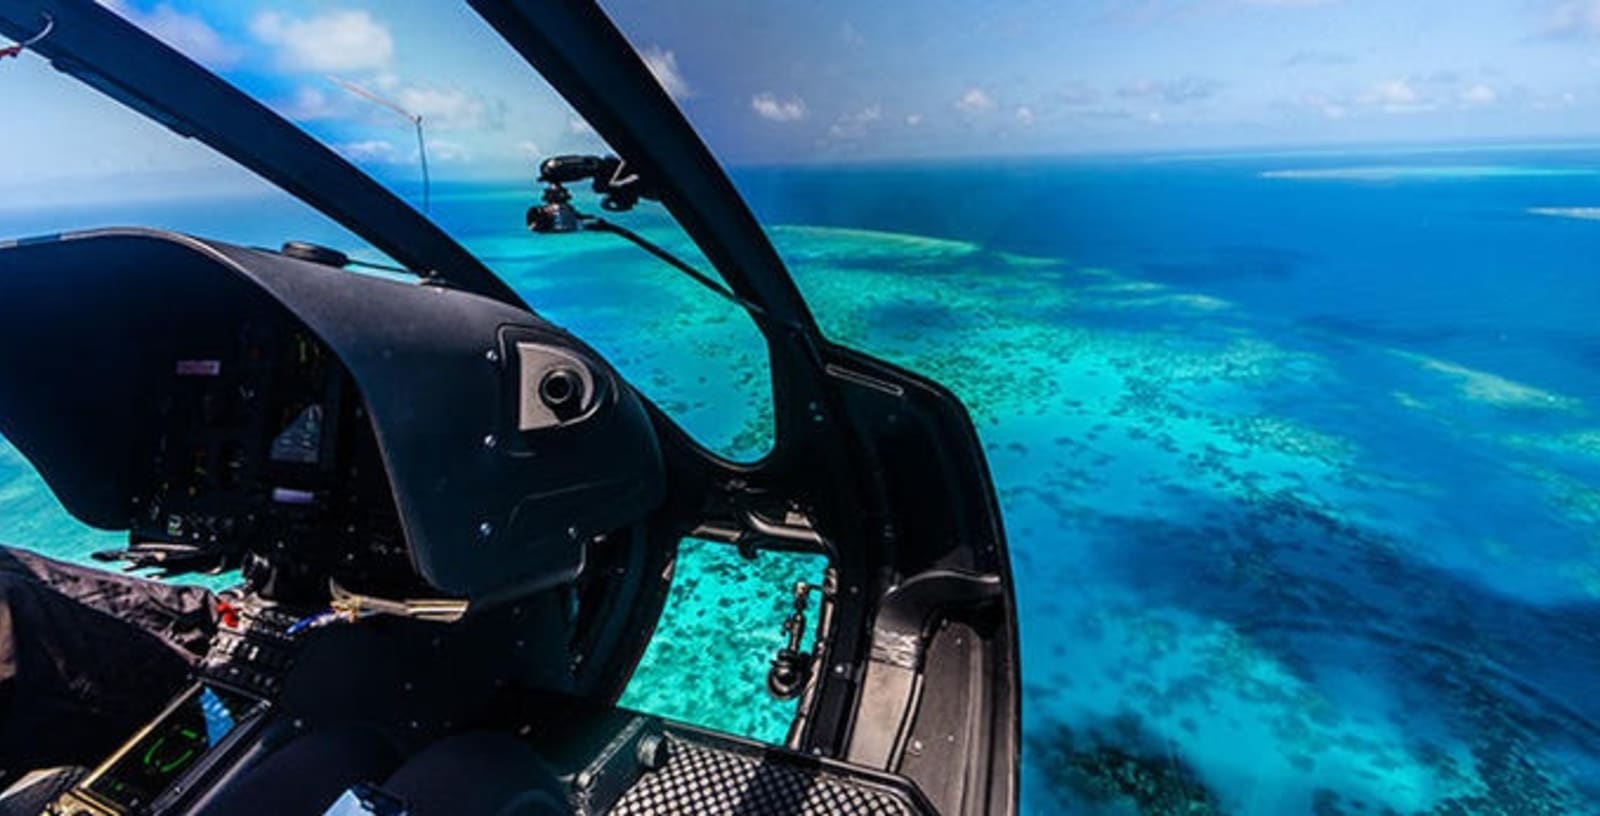 ps-helicopter-ride-over-great-barrier-reef.jpg